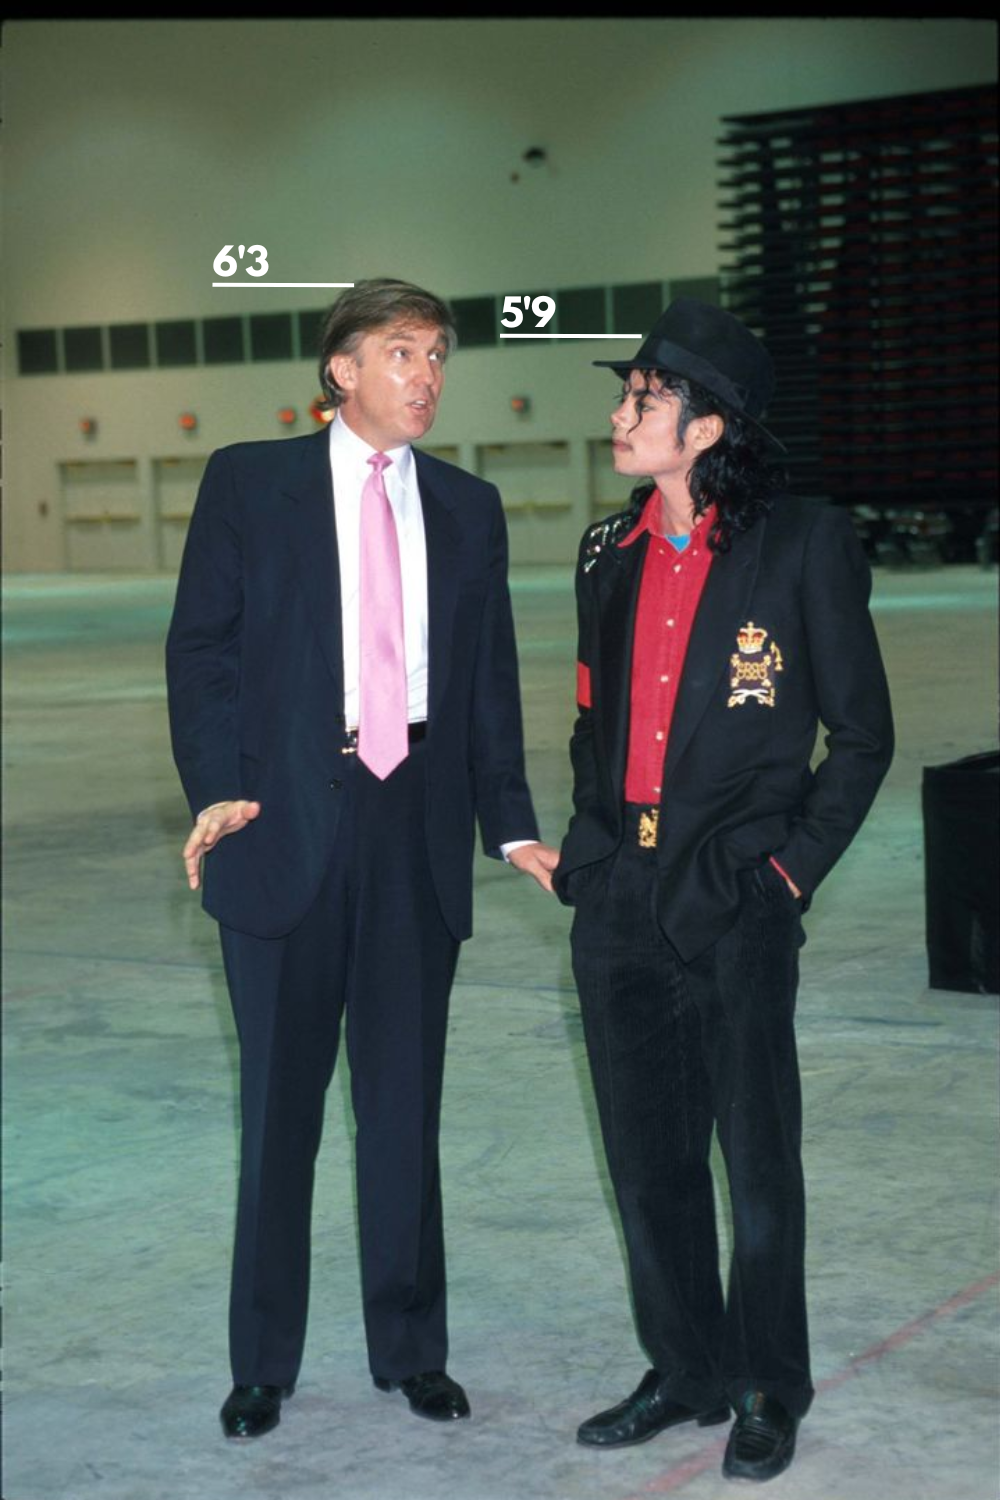 How tall was Michael Jackson